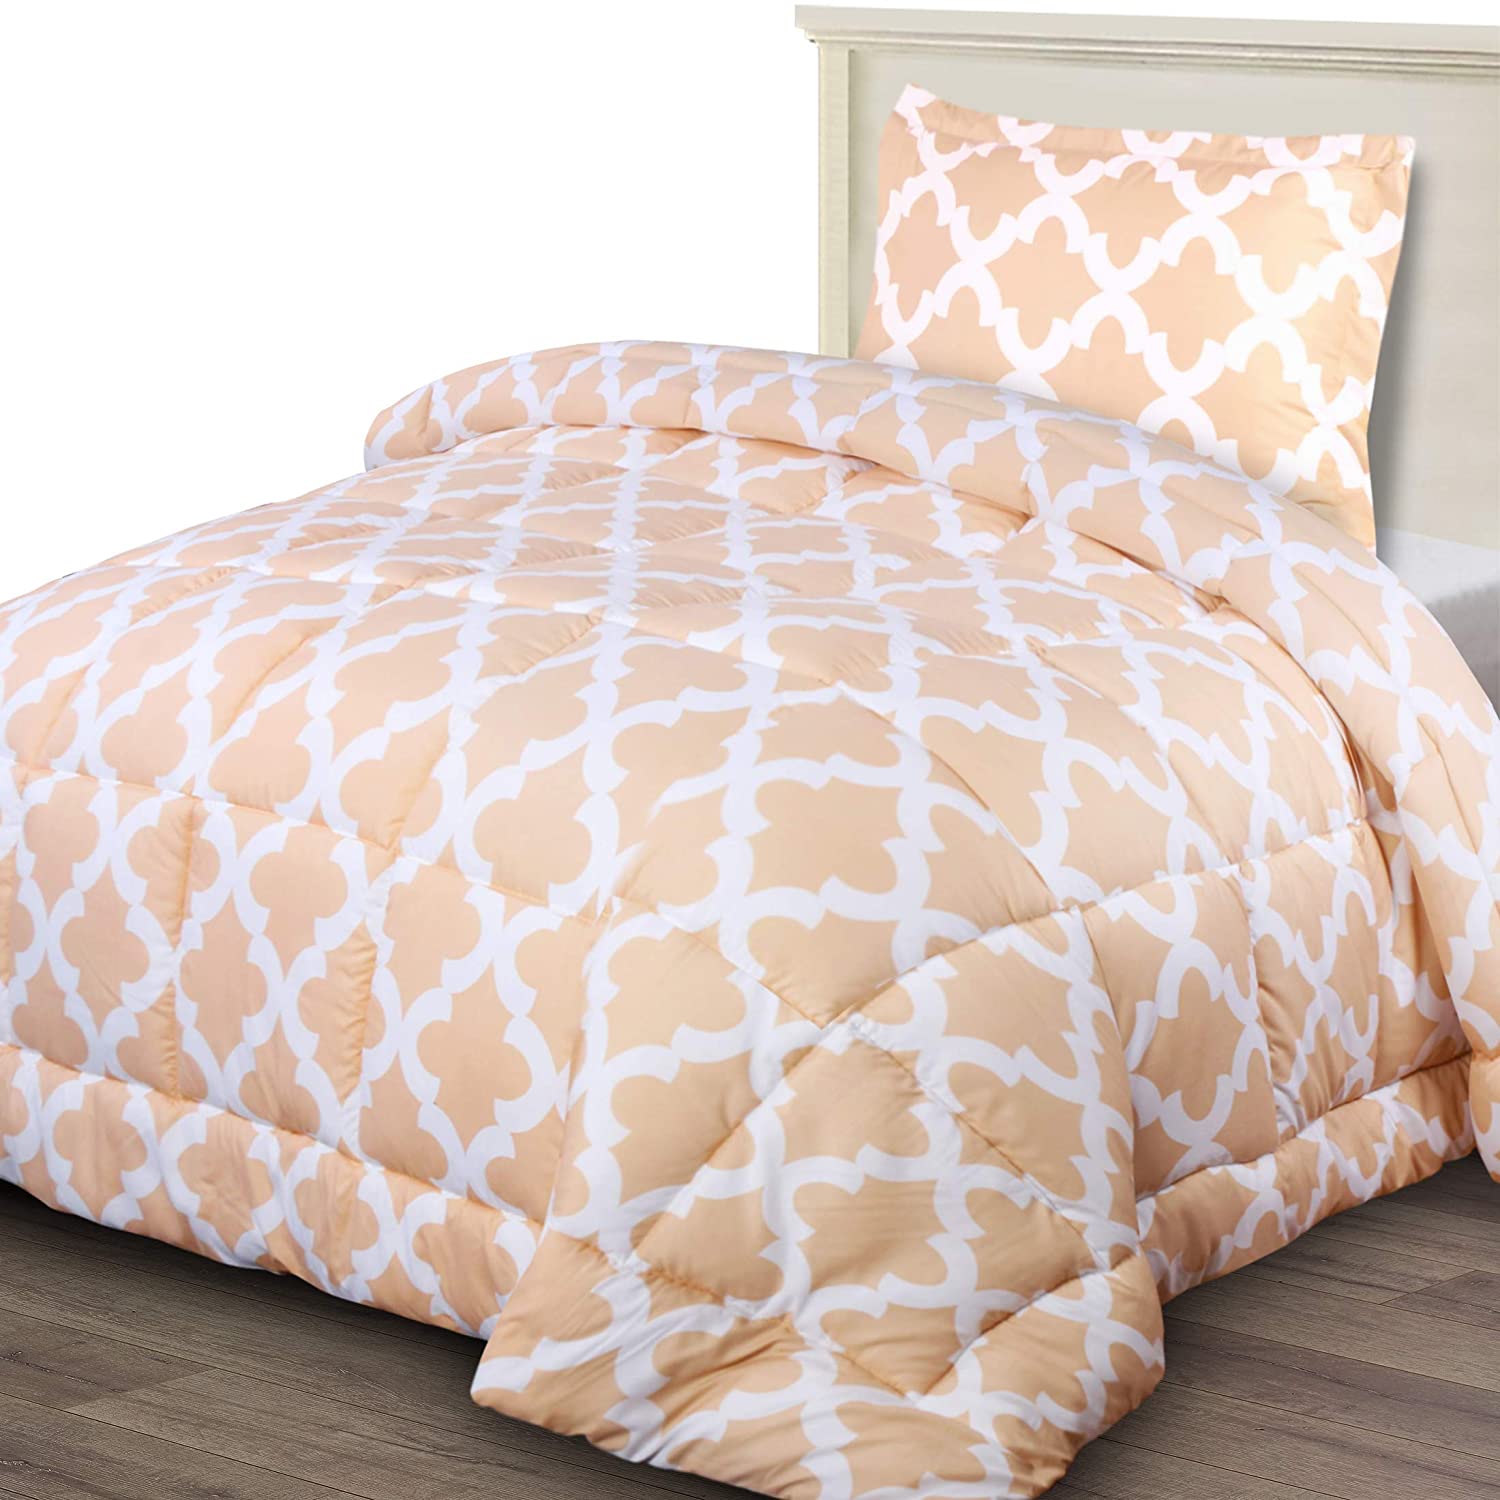 Details about   Utopia Bedding Printed Comforter Set Luxurio with 2 Pillow Shams Queen, Grey 